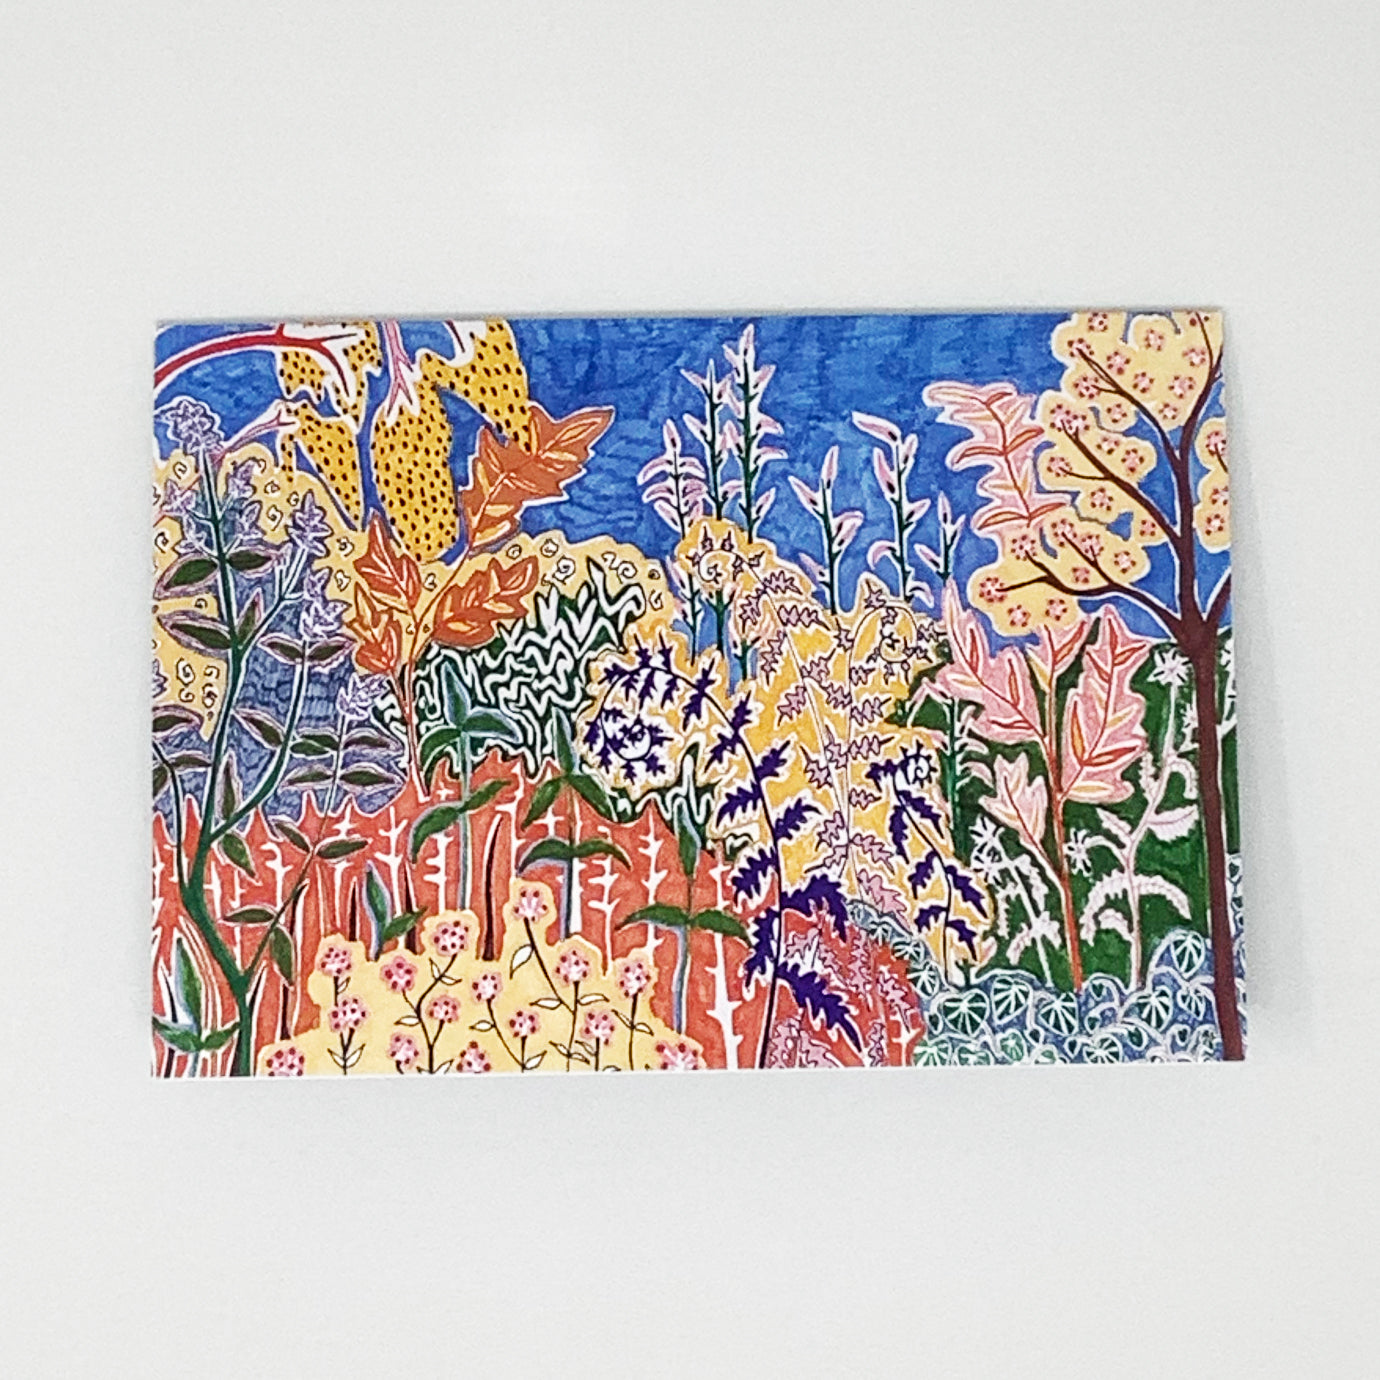 Psychedelic Garden Greetings Card by Joy Rooney